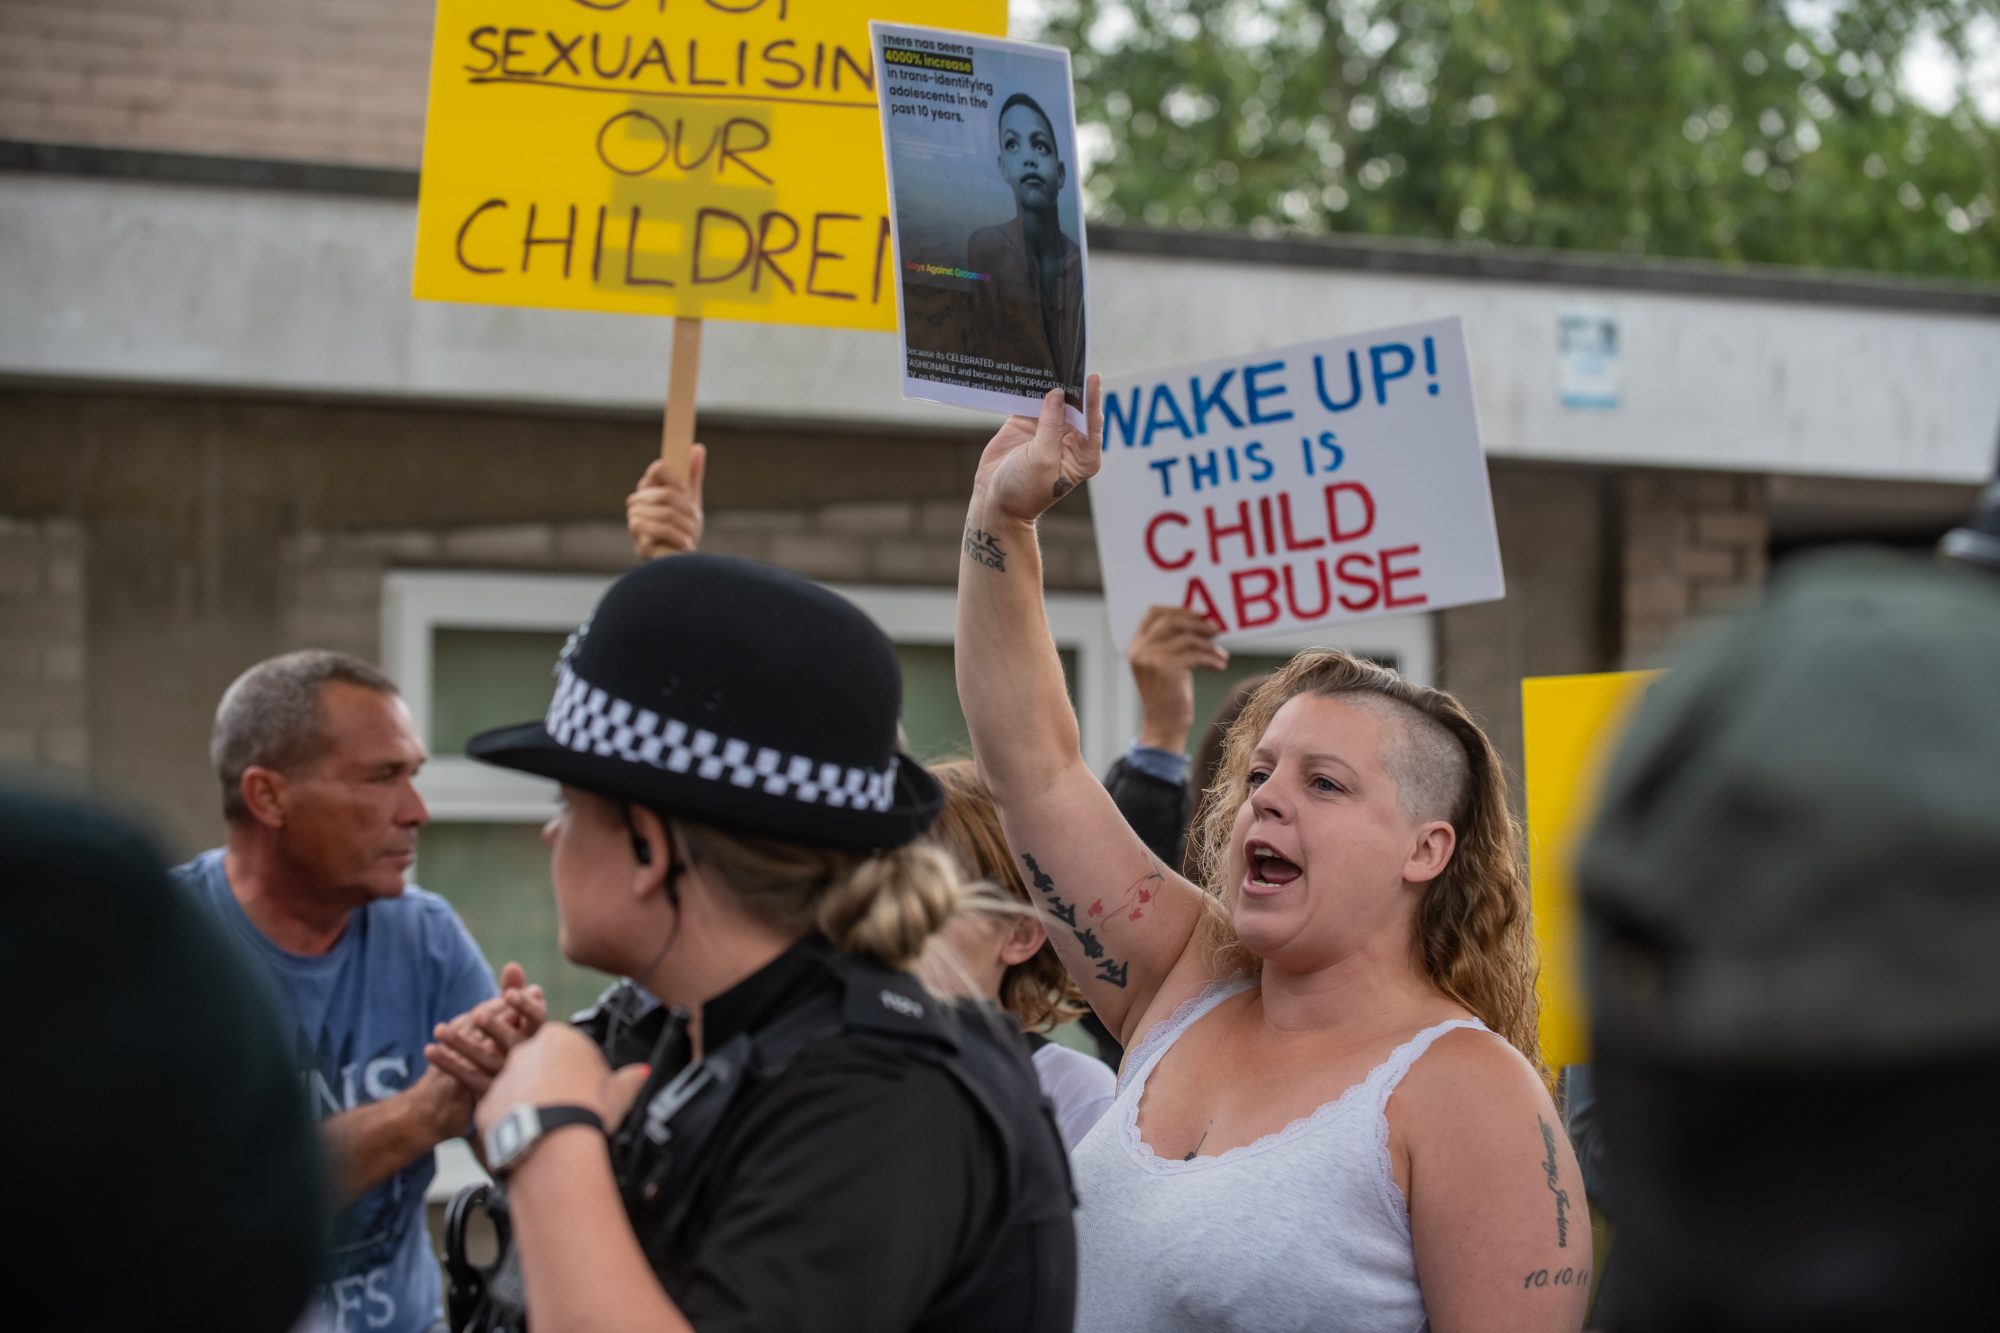 Protestors try to perform a citizen's arrest on a Drag performer from Drag Queen Story Hour UK at Henleaze Library, Bristol, July 28 2022. (Adam Hughes, SWNS/Zenger)